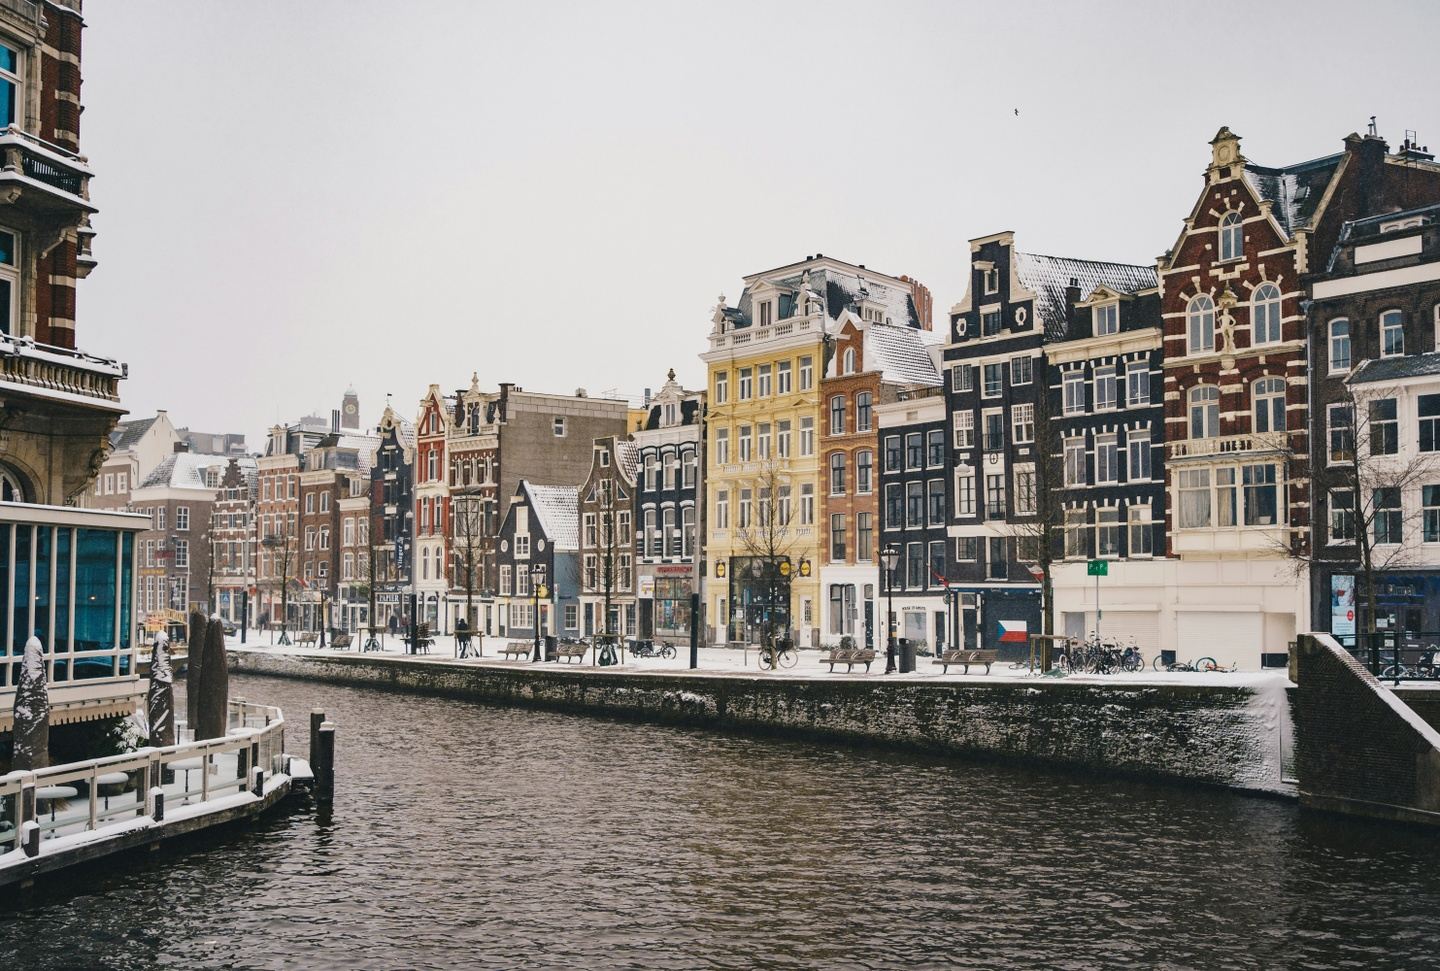 INSIDERS EXPERIENCE: Belgium and the Netherlands